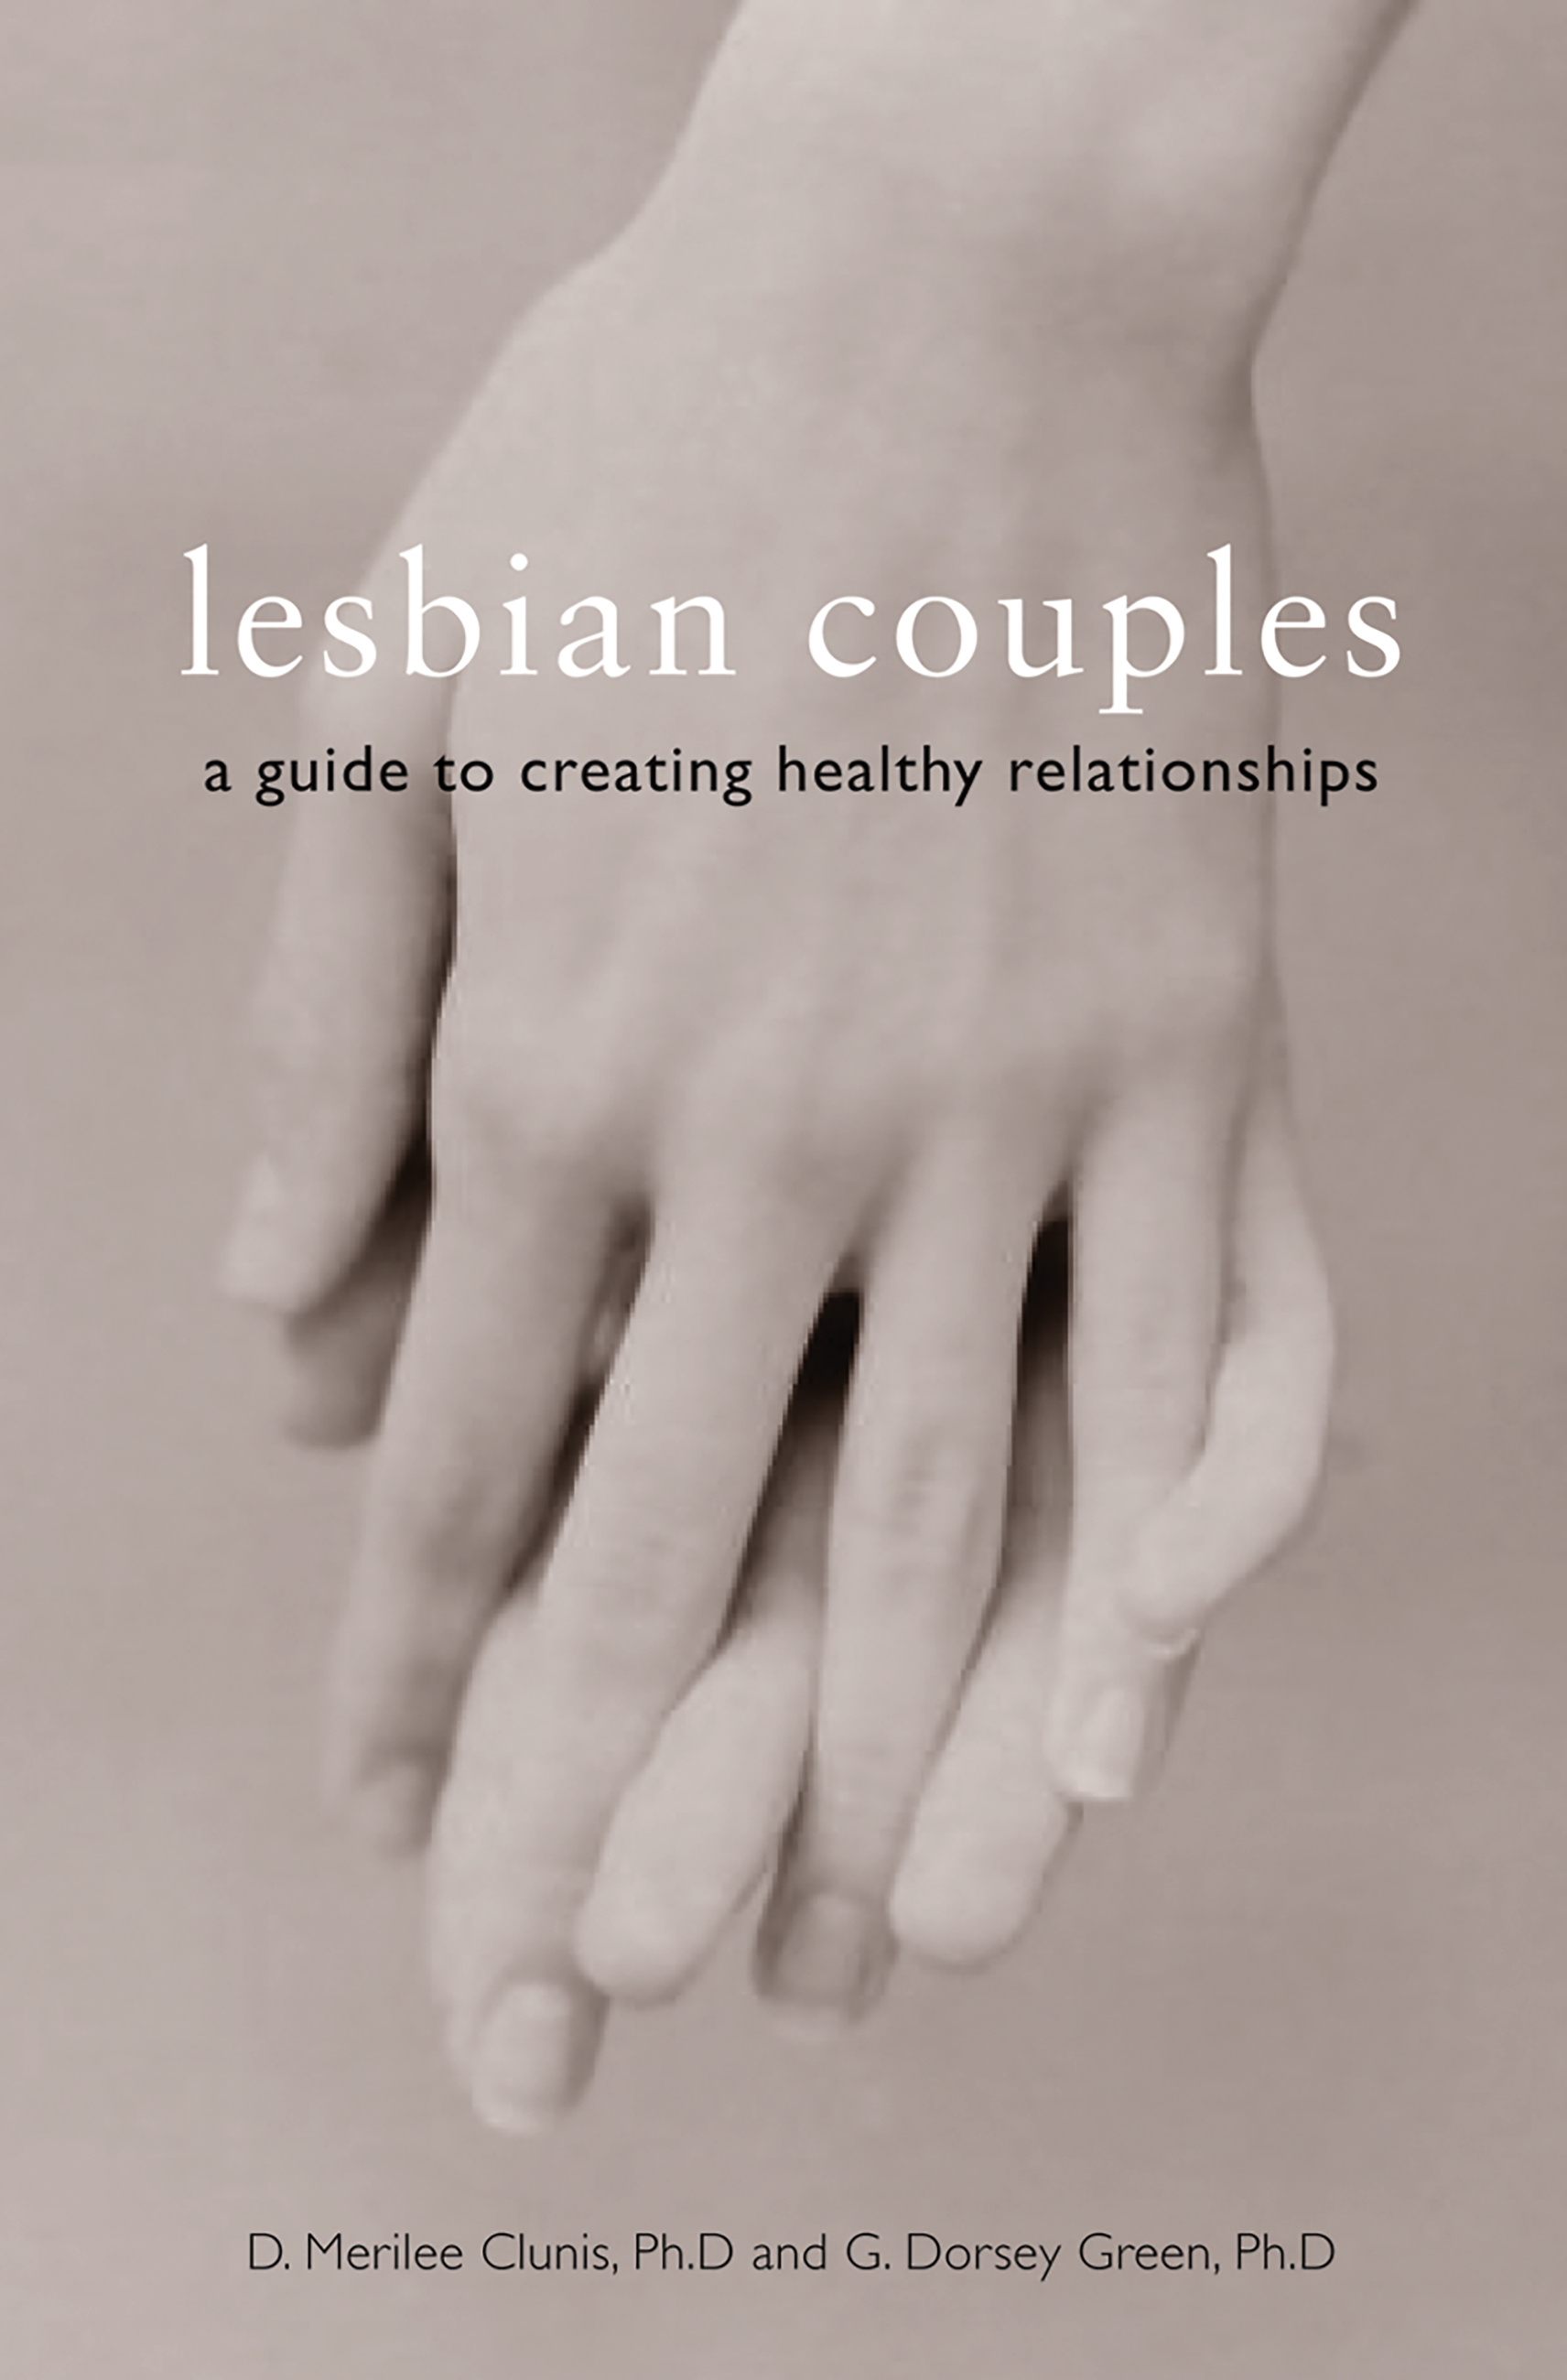 Forcedly Lesbian - Lesbian Couples by D. Merilee Clunis, PhD | Hachette Book Group